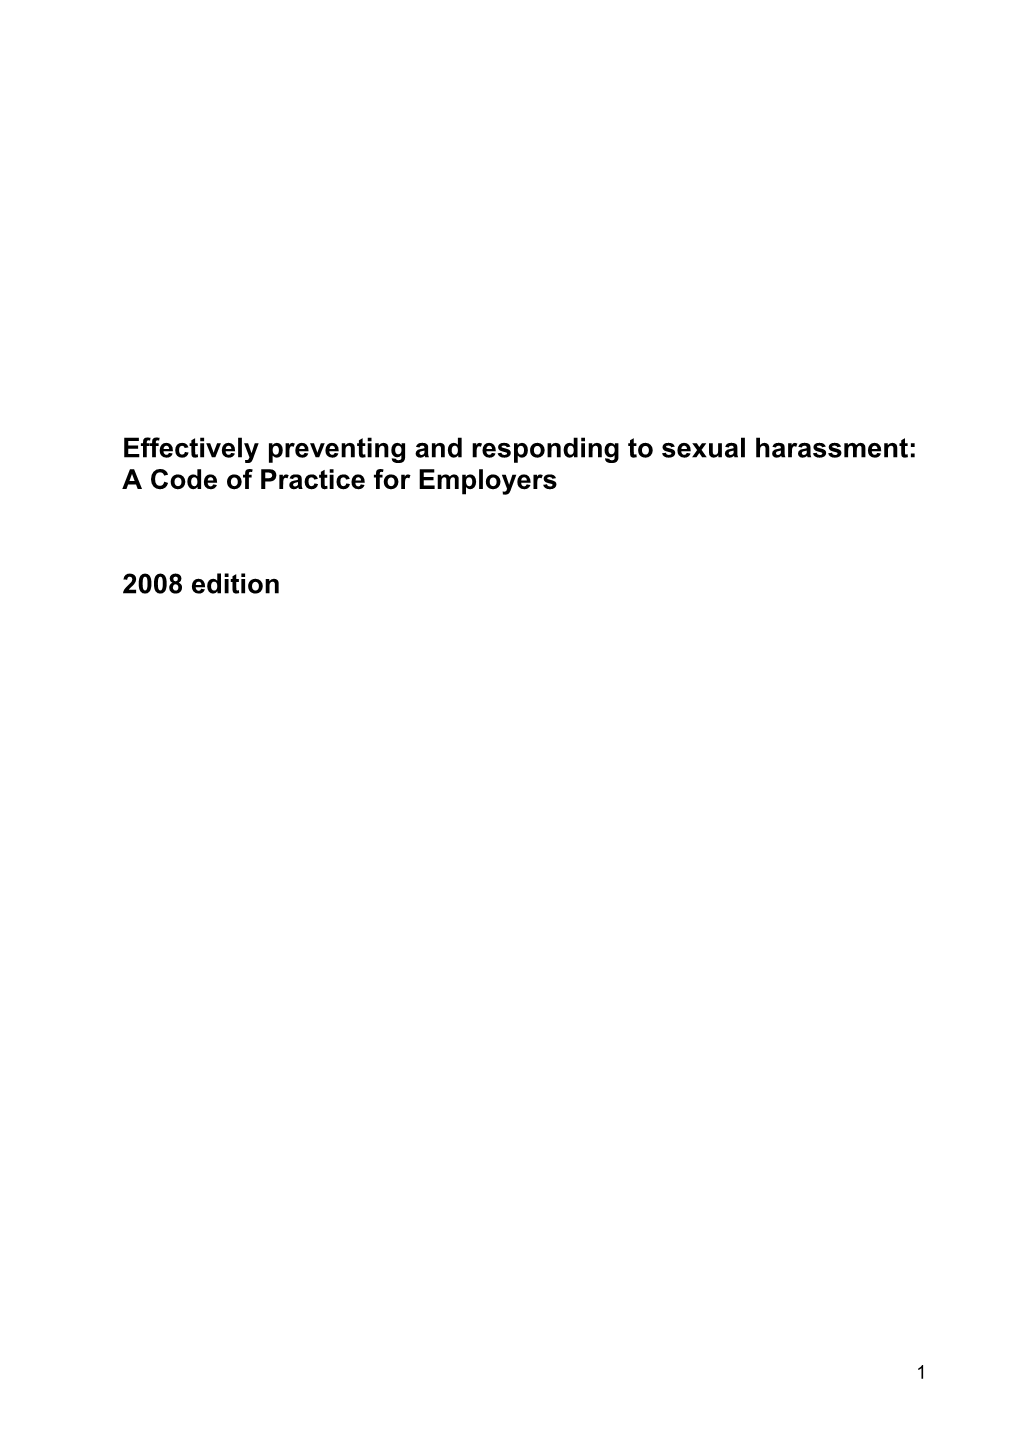 Effectively Preventing and Responding to Sexual Harassment: a Code of Practice for Employers